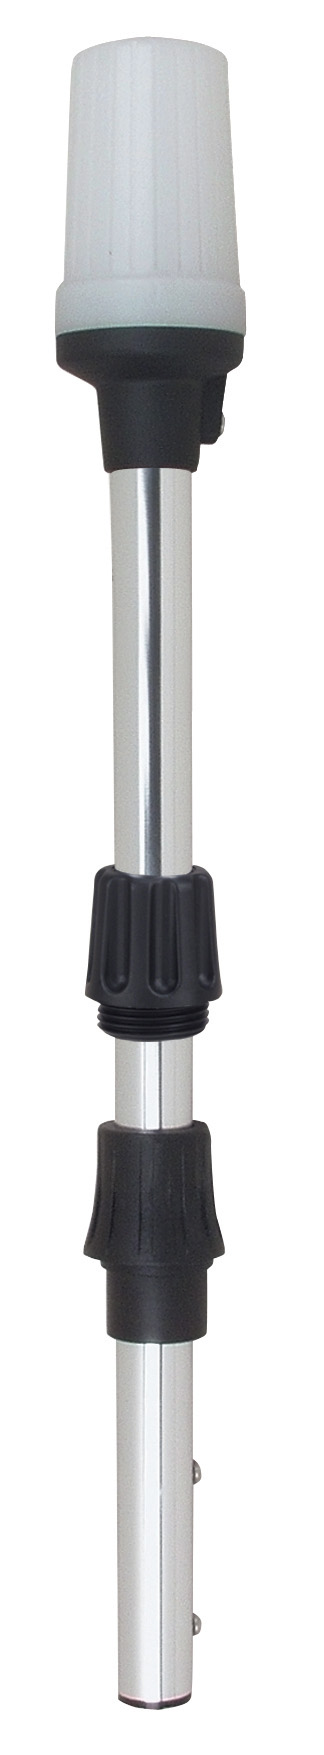 New Stealth Series Led All-round Light perko 1347dp6chr Straight Pole Height 48"